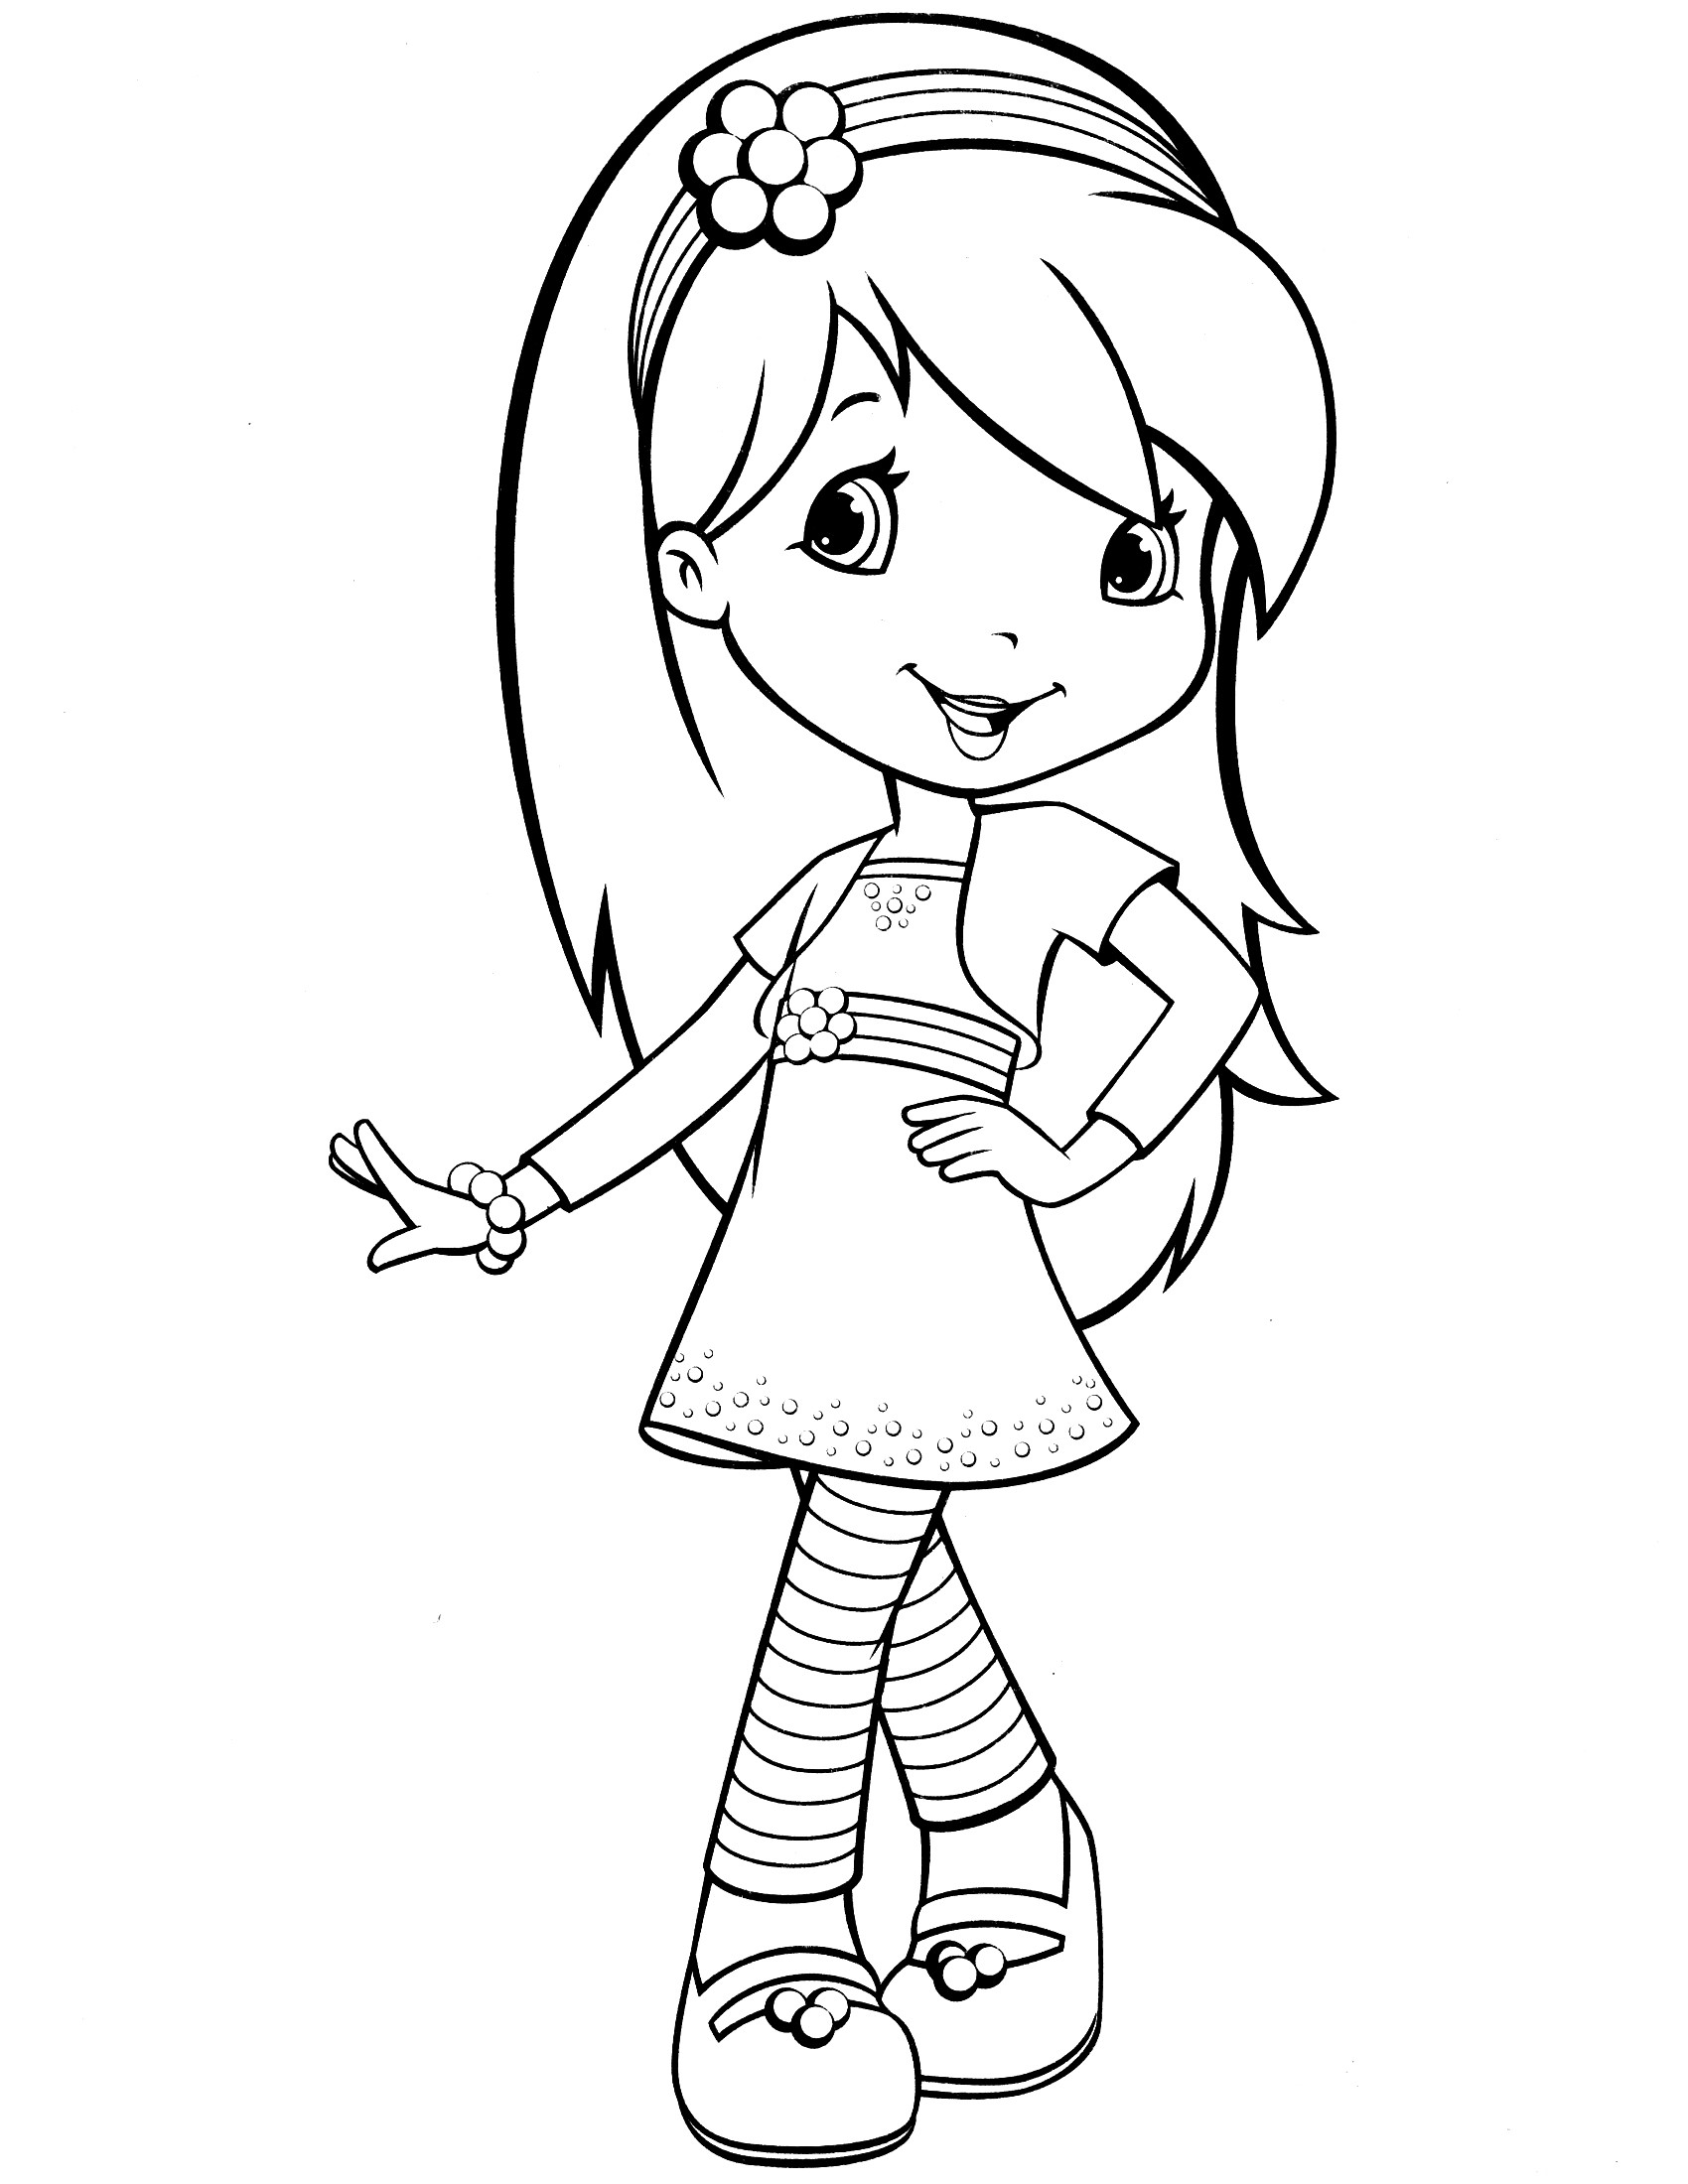 Strawberry Shortcake Coloring Page
 Strawberry Shortcake Coloring Pages Bestofcoloring